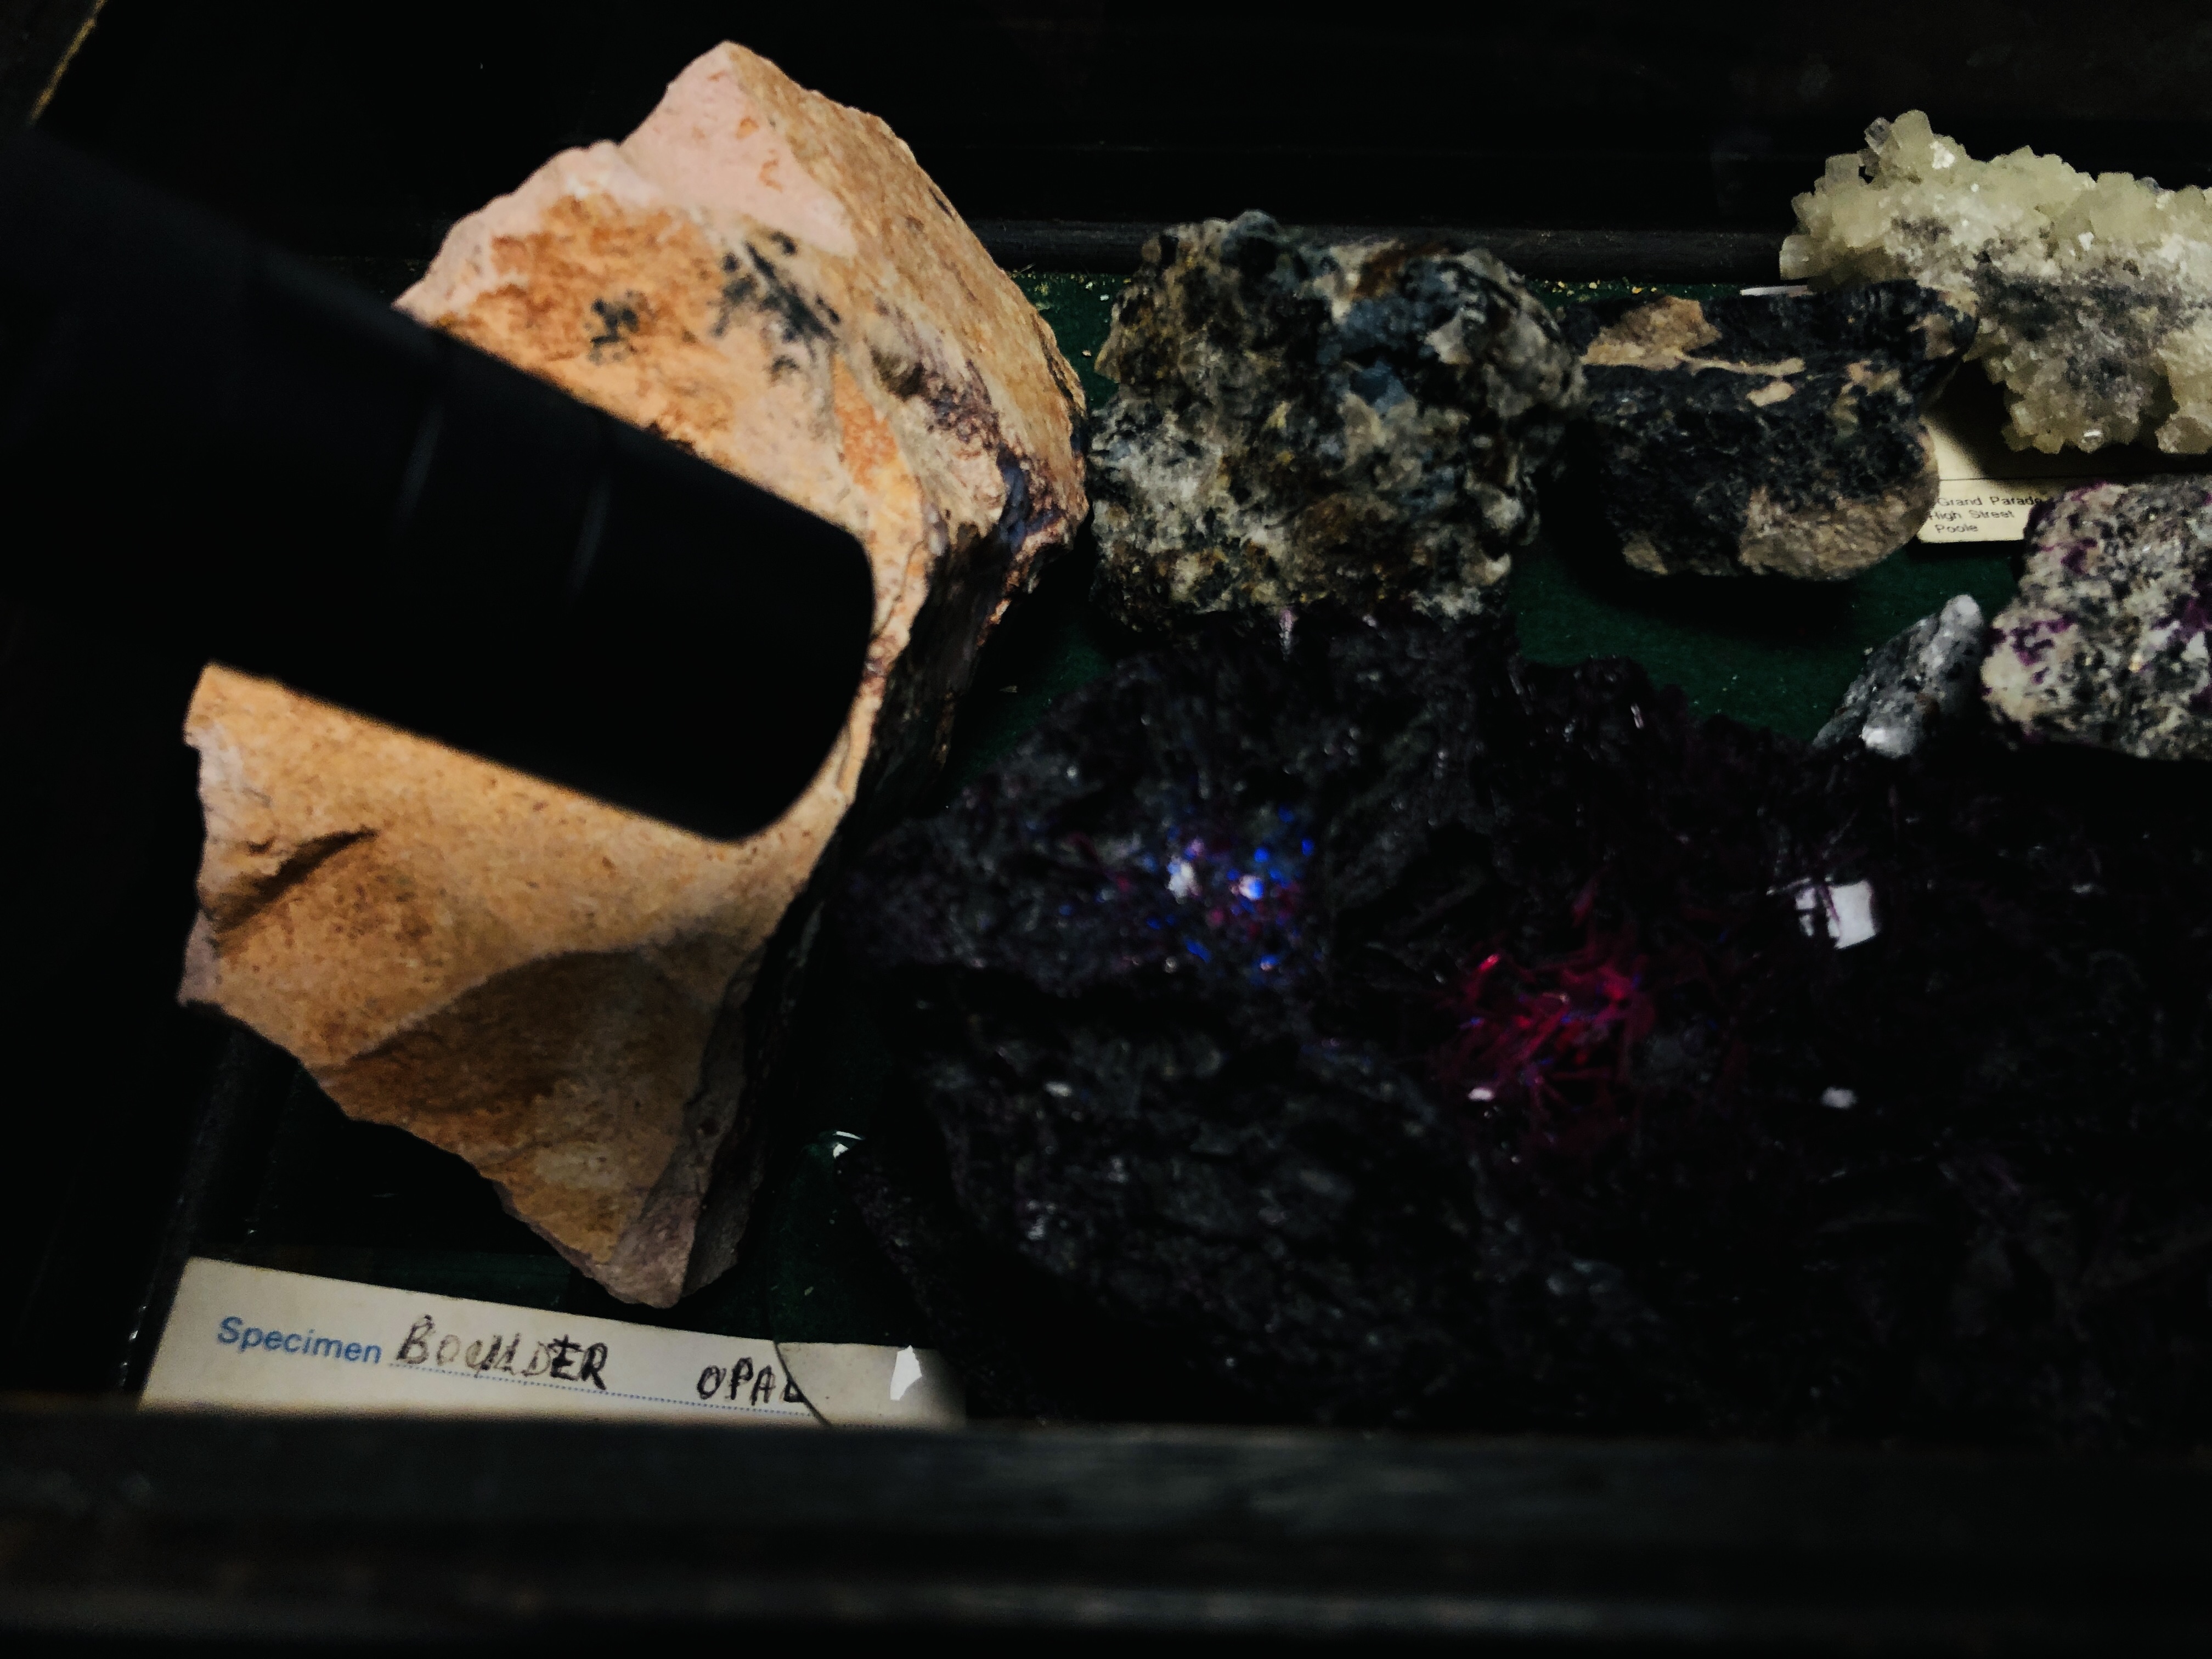 A COLLECTION OF CRYSTAL AND MINERAL ROCK EXAMPLES IN A DISPLAY CASE INSCRIBED "THE OPAL" FOR IN - Image 2 of 5